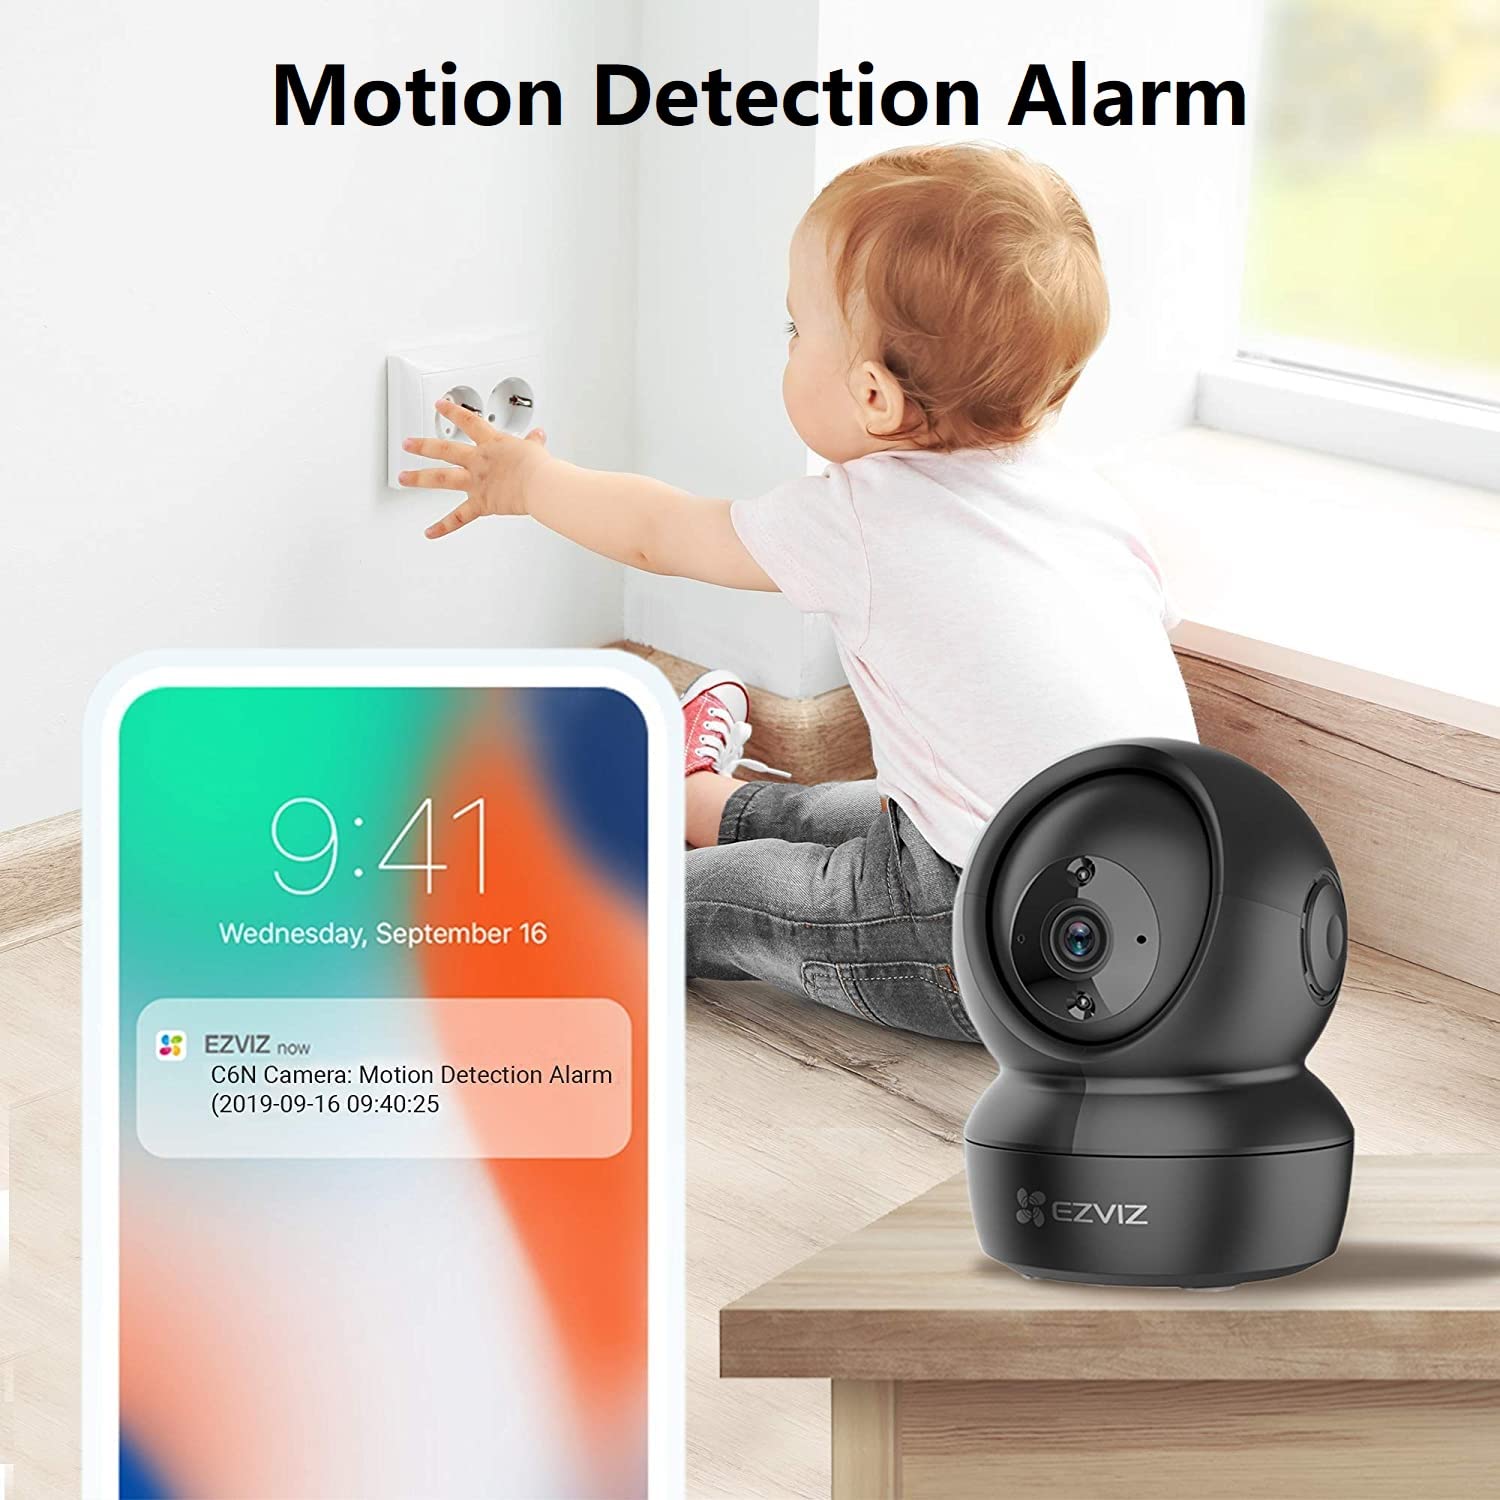 EZVIZ Smart Indoor Security Camera, 1080P Motorized Pan-Tilt Cam with Motion Tracking, 360° Visual Coverage, Smart IR Night Vision up to 10M, Two-Way Talk, Sleep Mode for Privacy Protection(C6N Black)